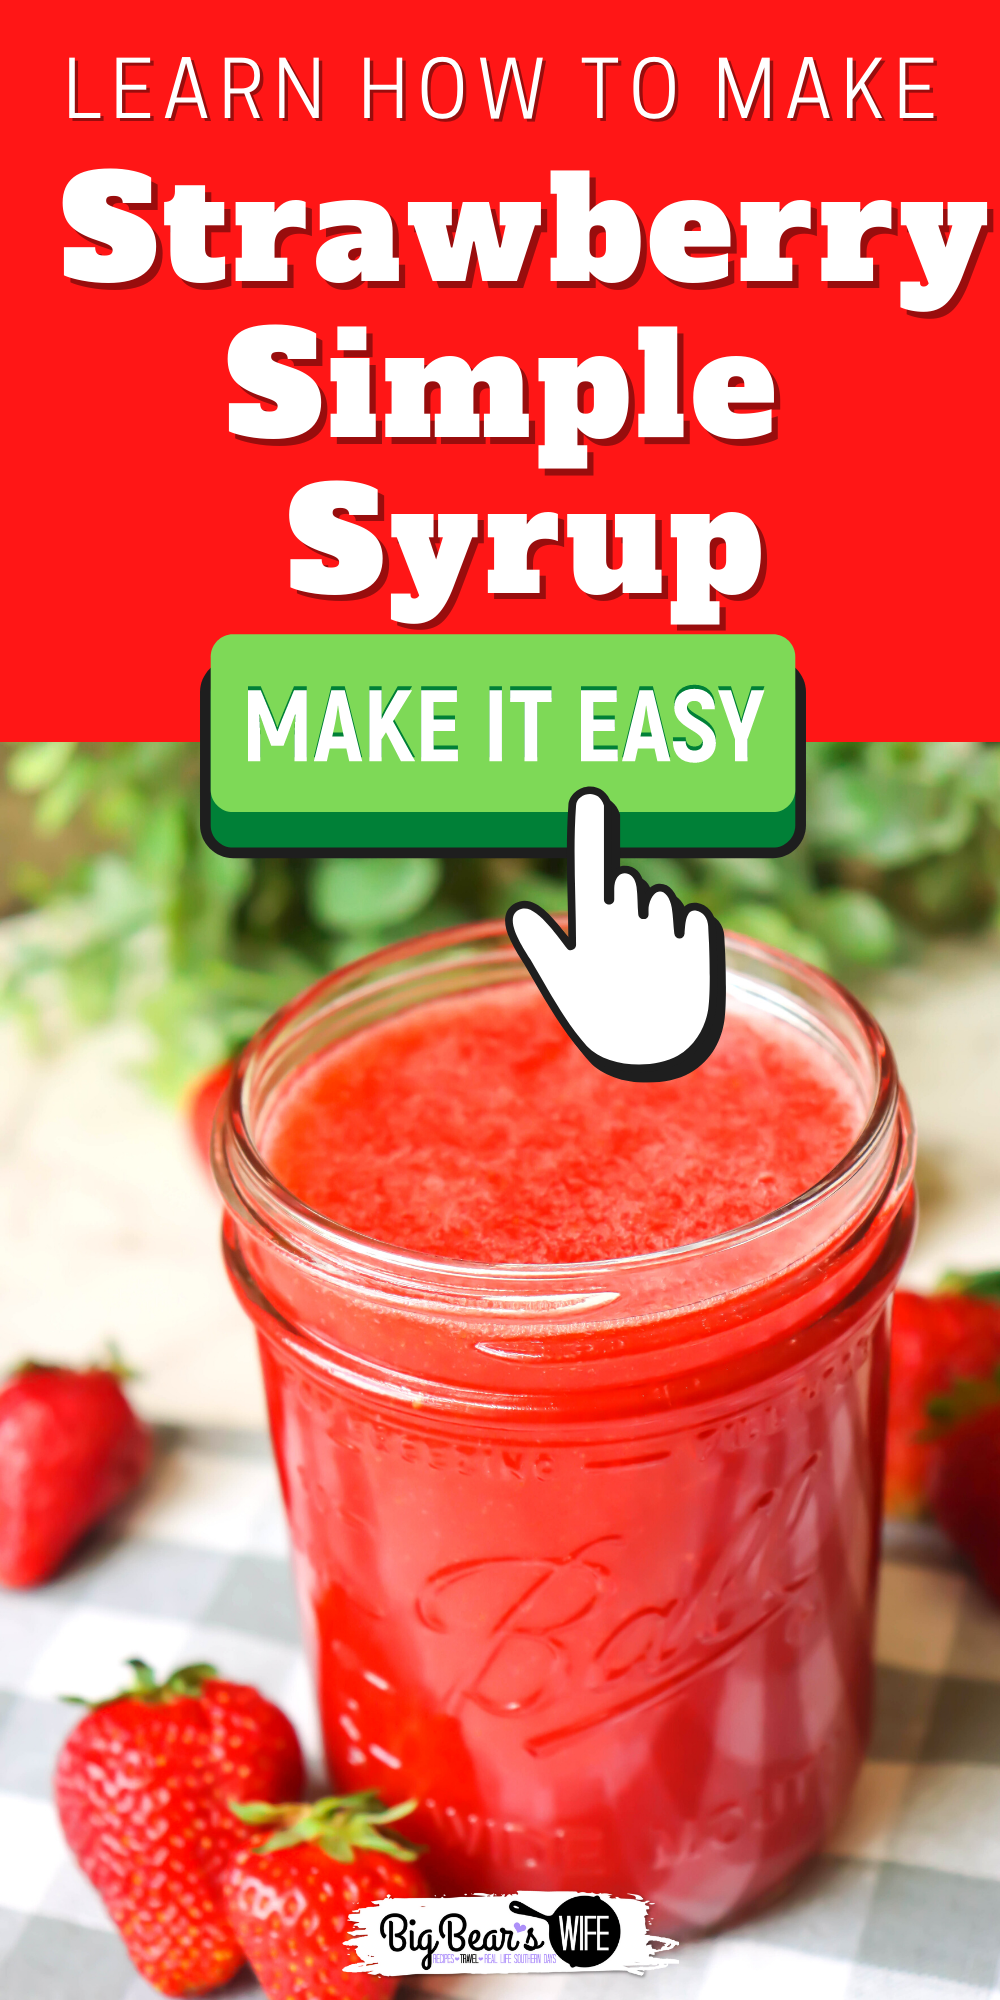 This This 3-ingredient homemade Strawberry Simple Syrup is great for Strawberry Lemonade and homemade summer cocktails and/or mocktails! via @bigbearswife